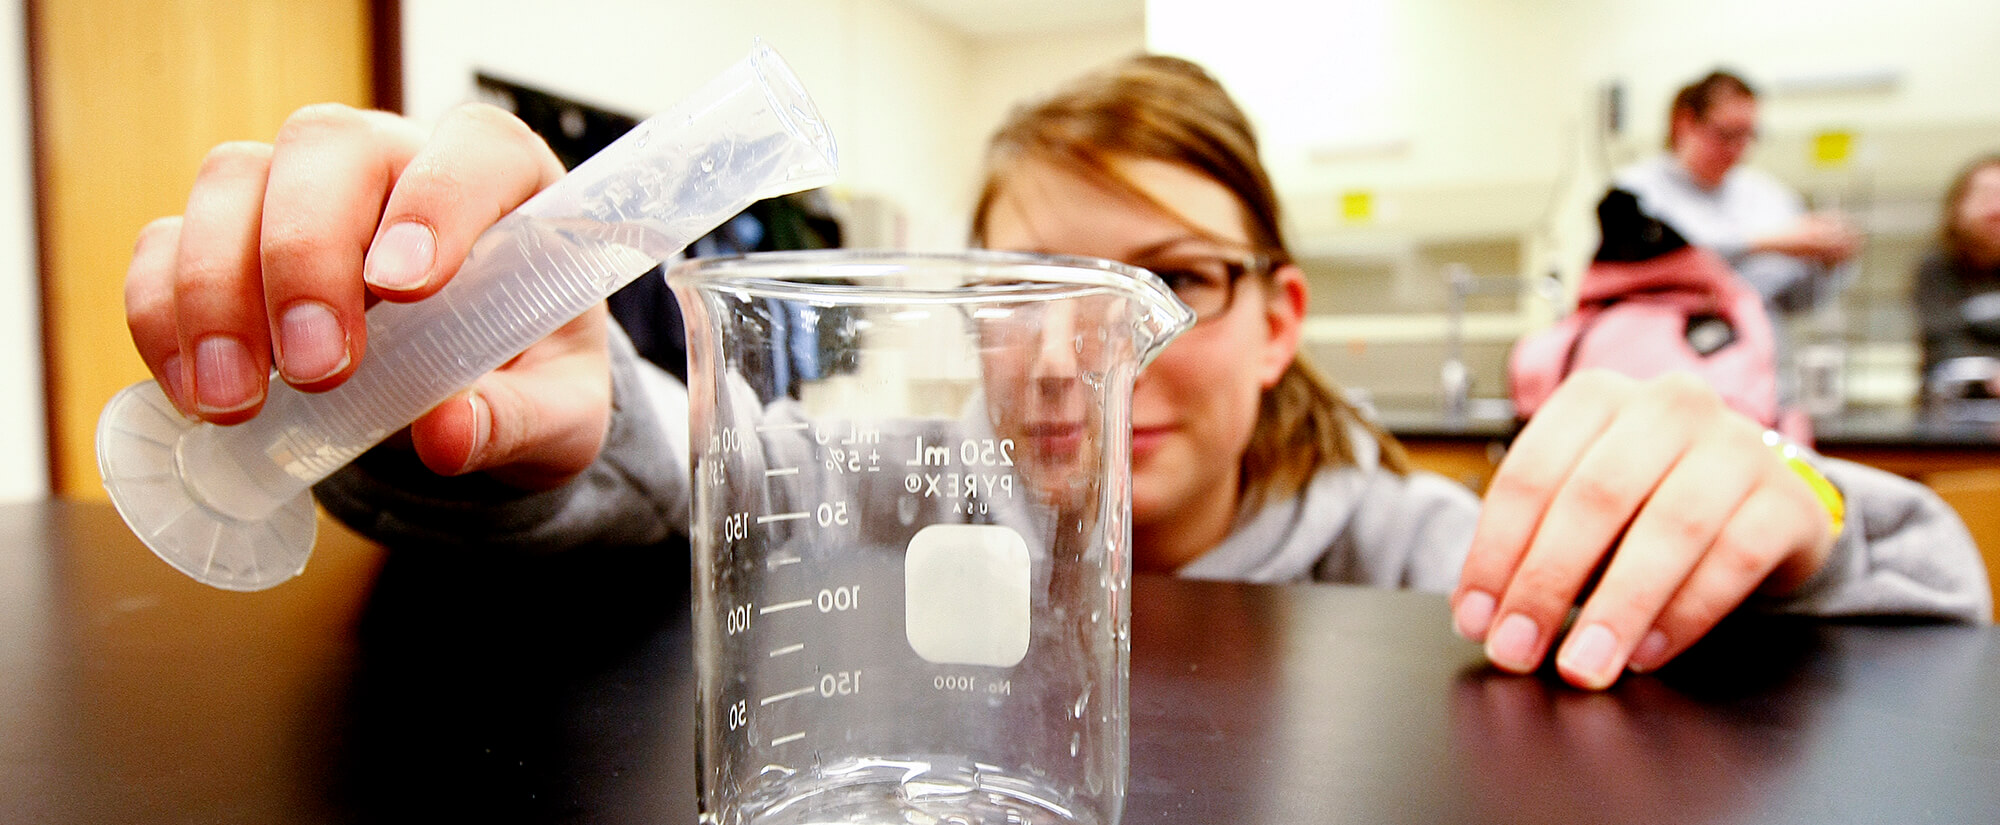 A student pours a liquid from a small measuring tool into a measuring cup.